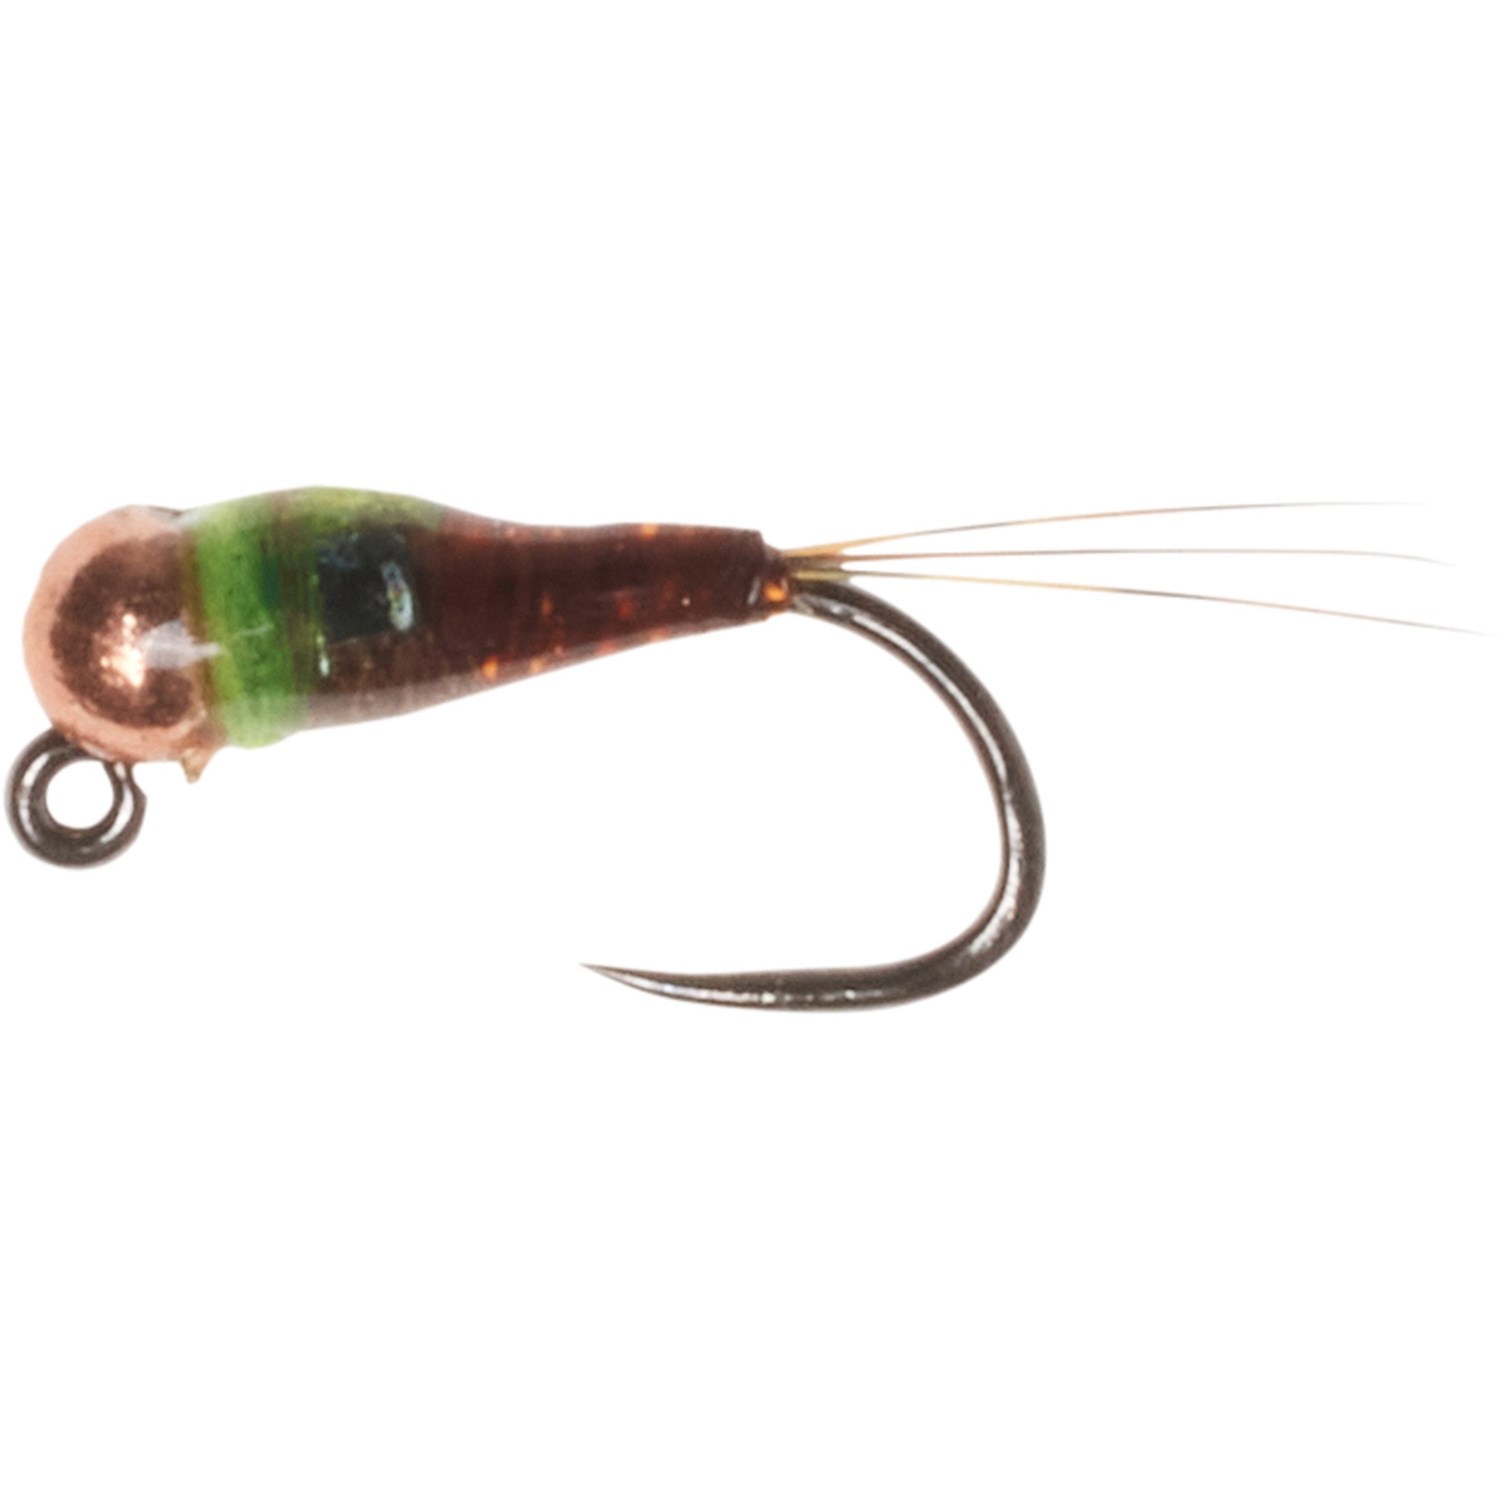 () 󥿥ʥե饤ѥˡ С֥쥹  å Хå ֥å ˥ ե饤 -  Montana Fly Company Barbless Jig Crack Back Bullet Nymph Fly - Dozen Brown